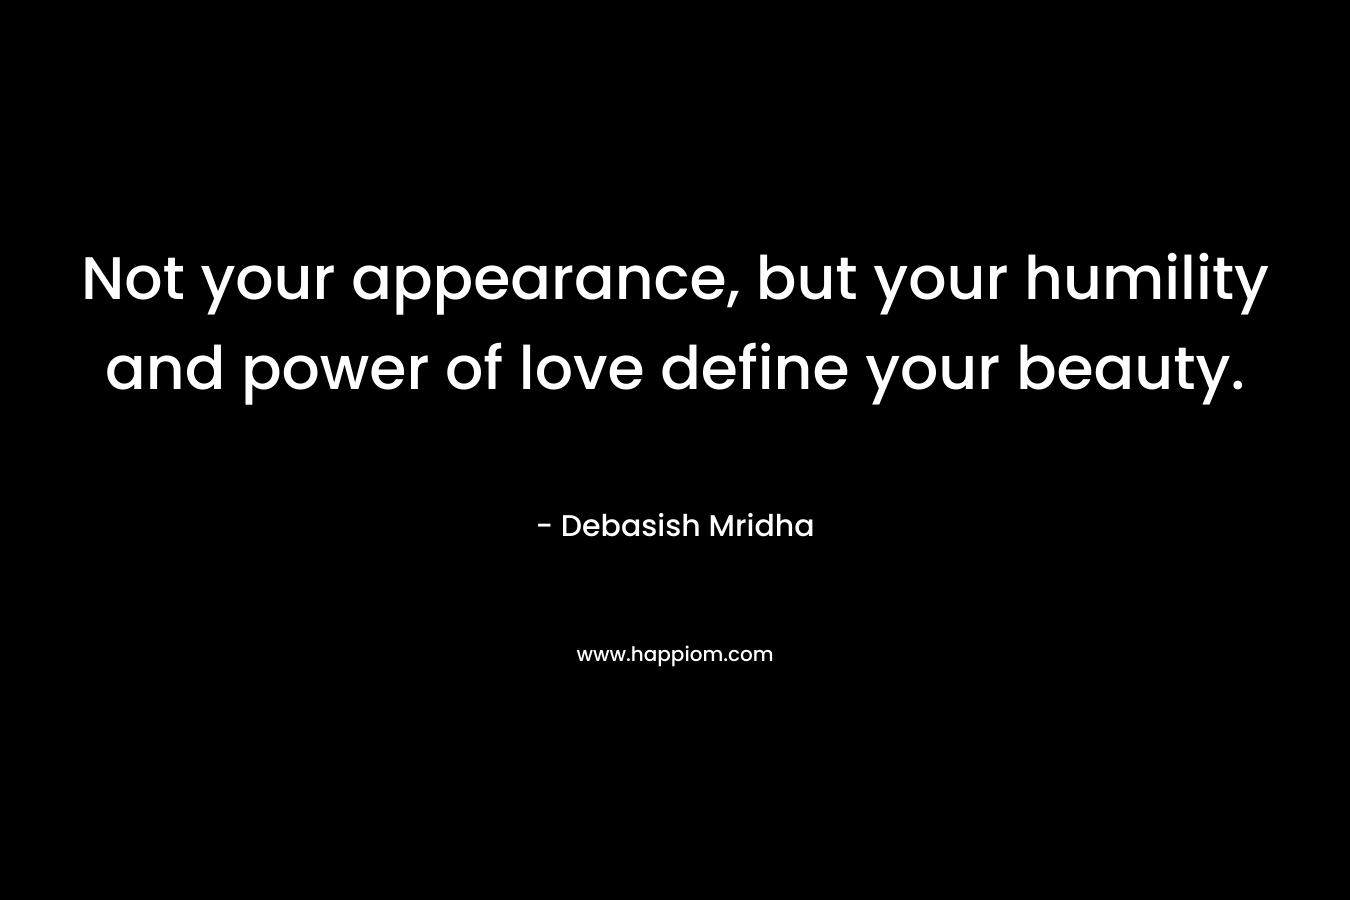 Not your appearance, but your humility and power of love define your beauty.